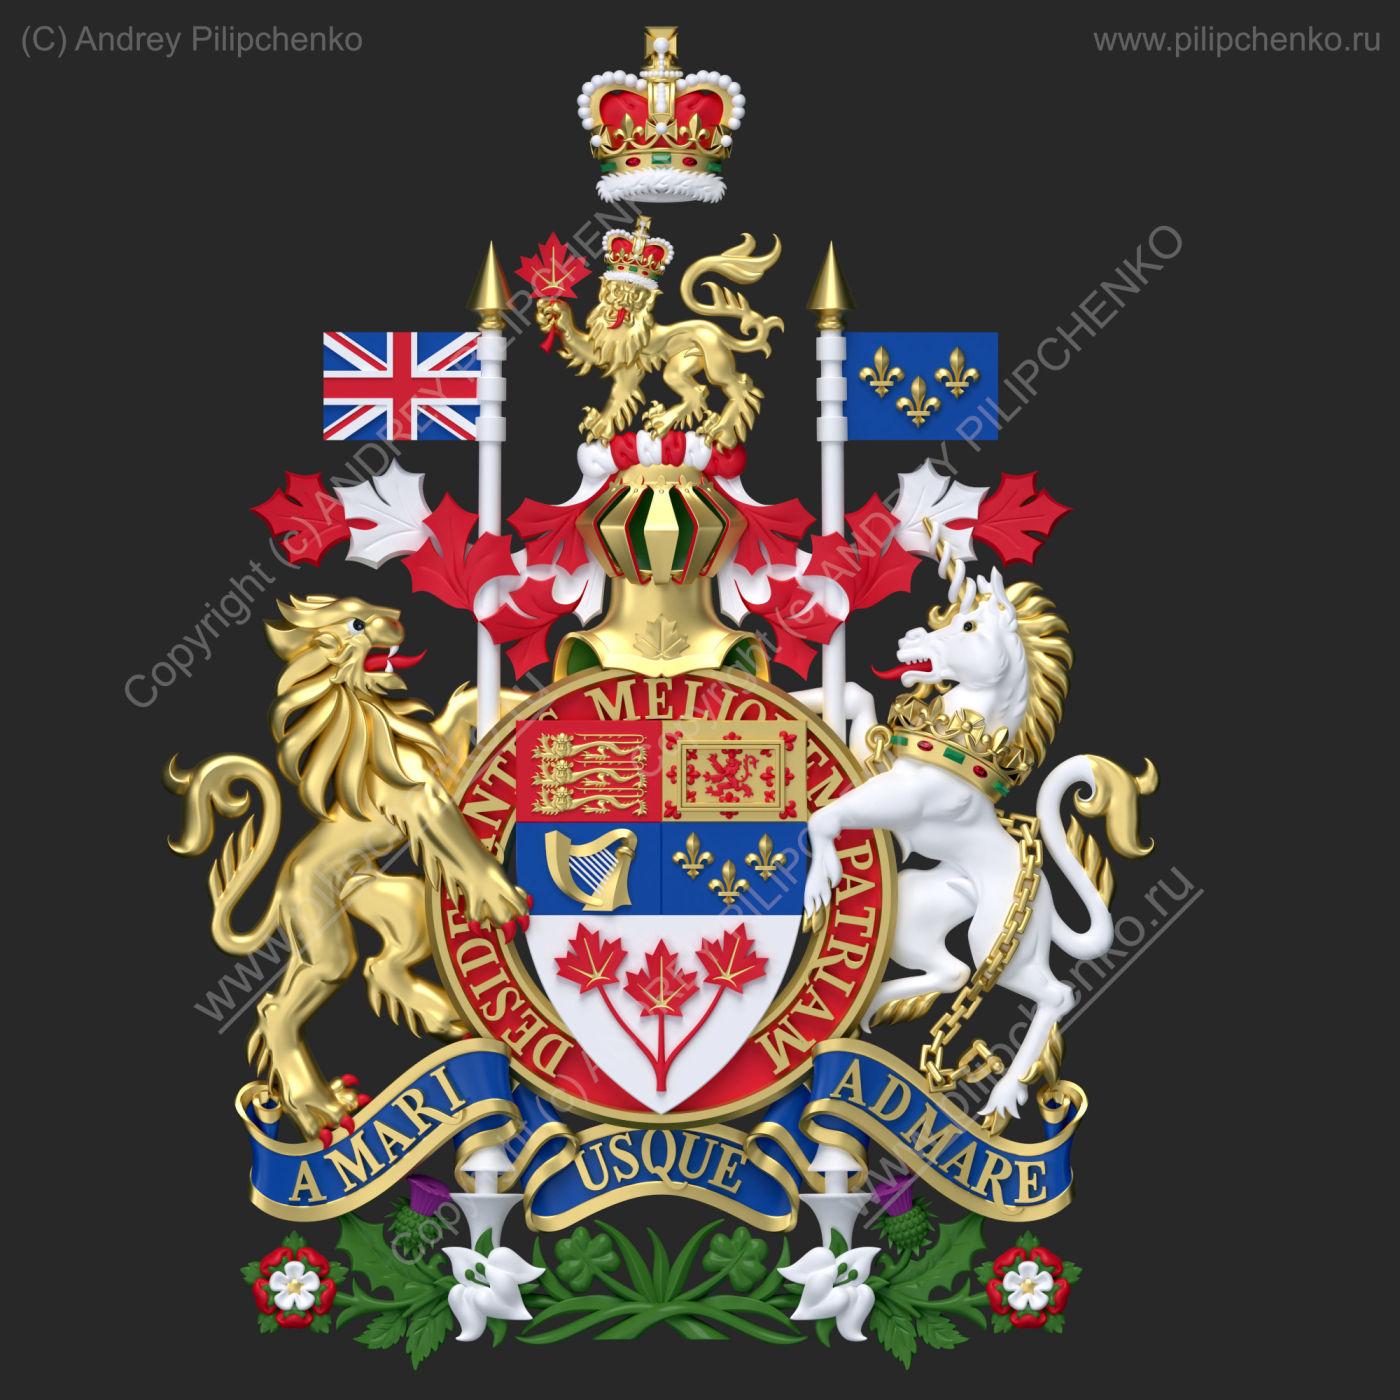 High resolution image of coat of arms of the Canada